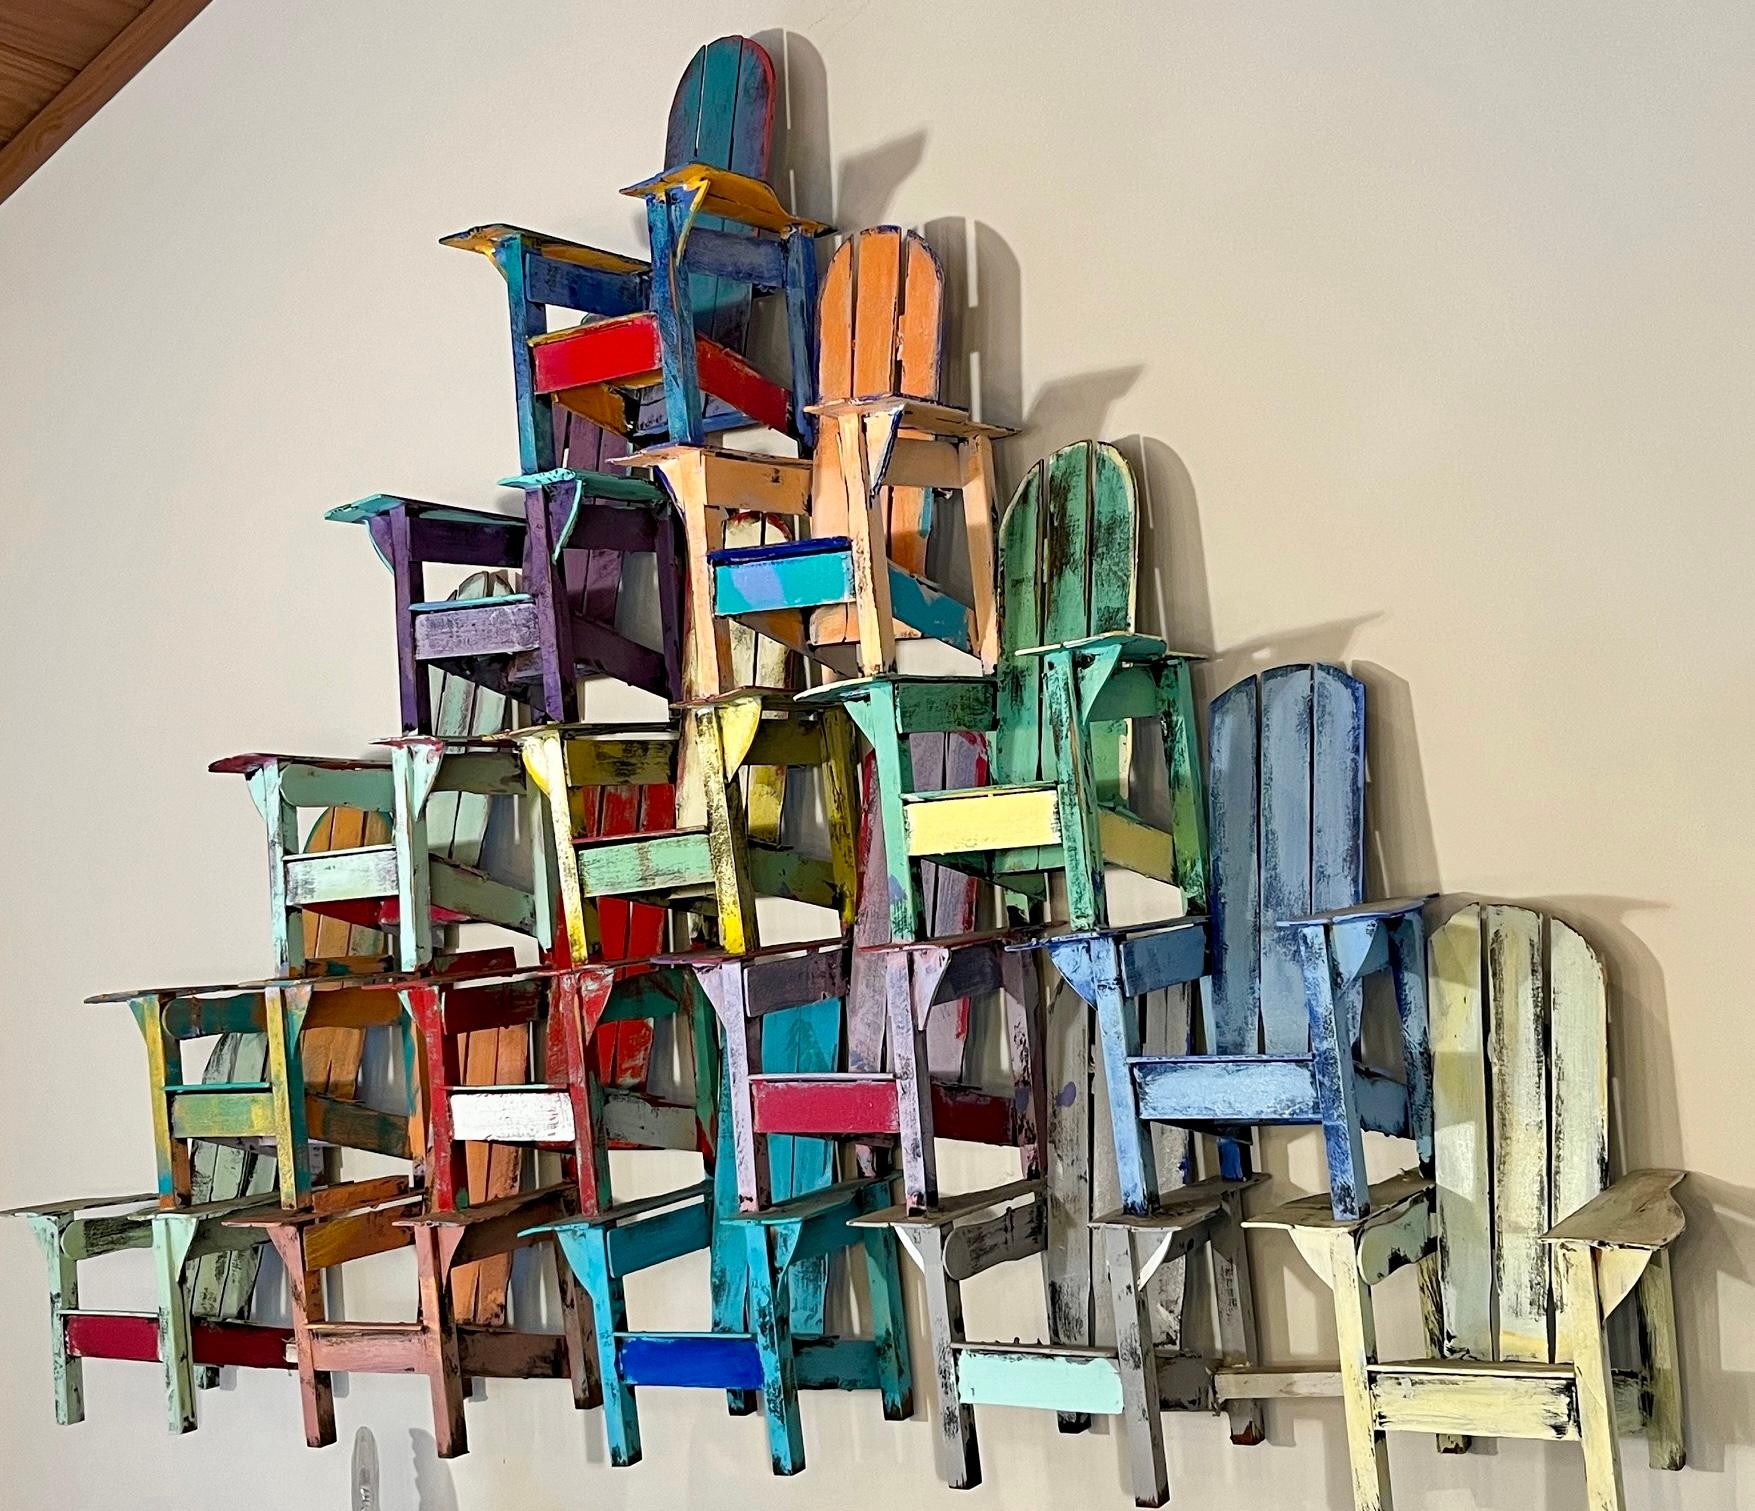 A colorful three dimensional painted wood model of stacked Adirondack chairs.  These wall sculptures by Paul Jacobsen are instant conversation pieces.  

Paul Jacobsen used everyday objects, such as chairs, cars, airplanes, trains, motorcycles and